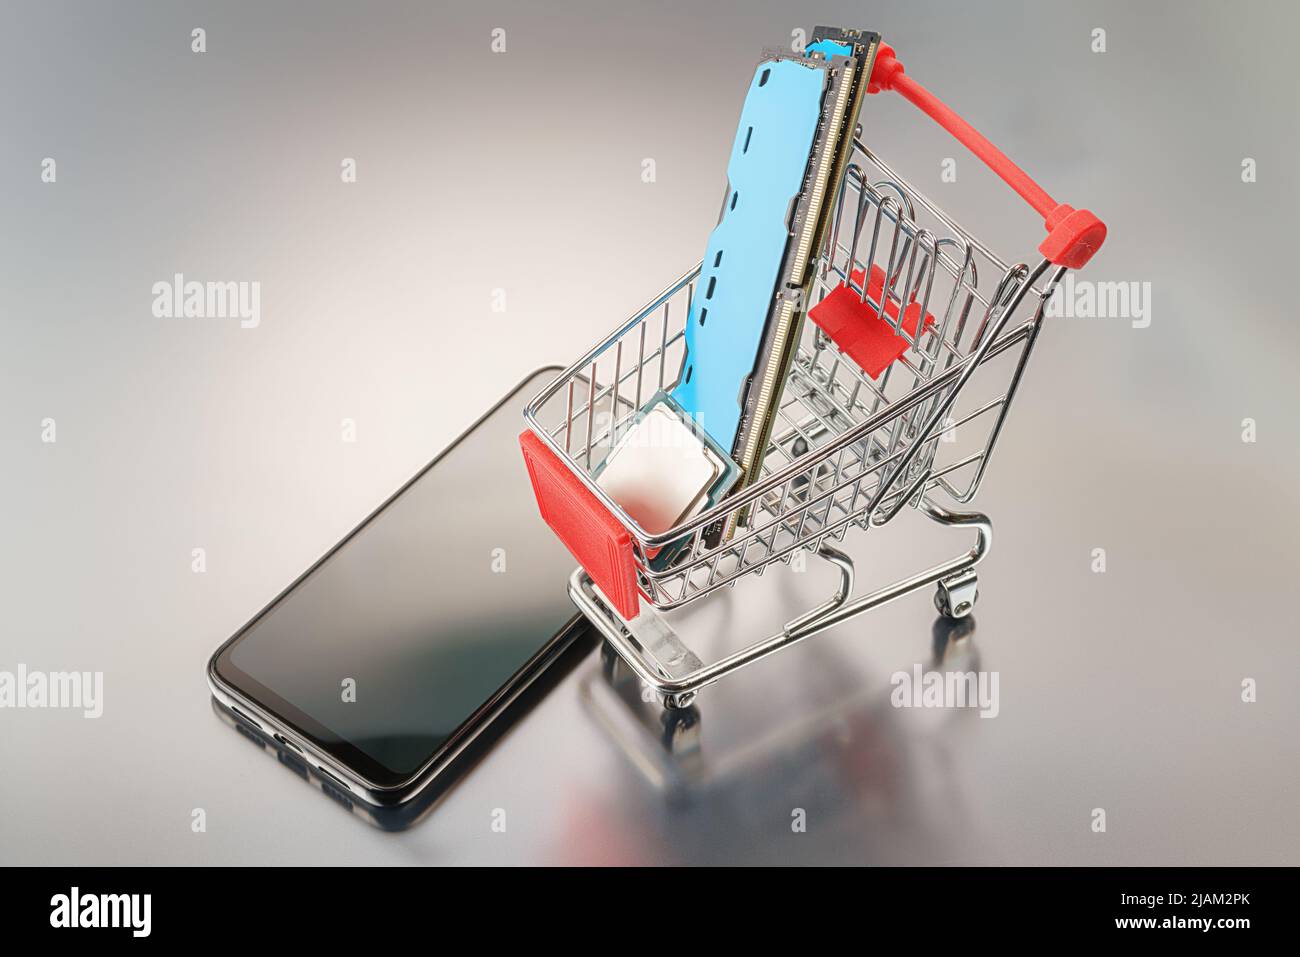 Toy shopping cart with computer components and smartphone. On a gray background with reflection. Sale and purchase of electronics and online trade the Stock Photo